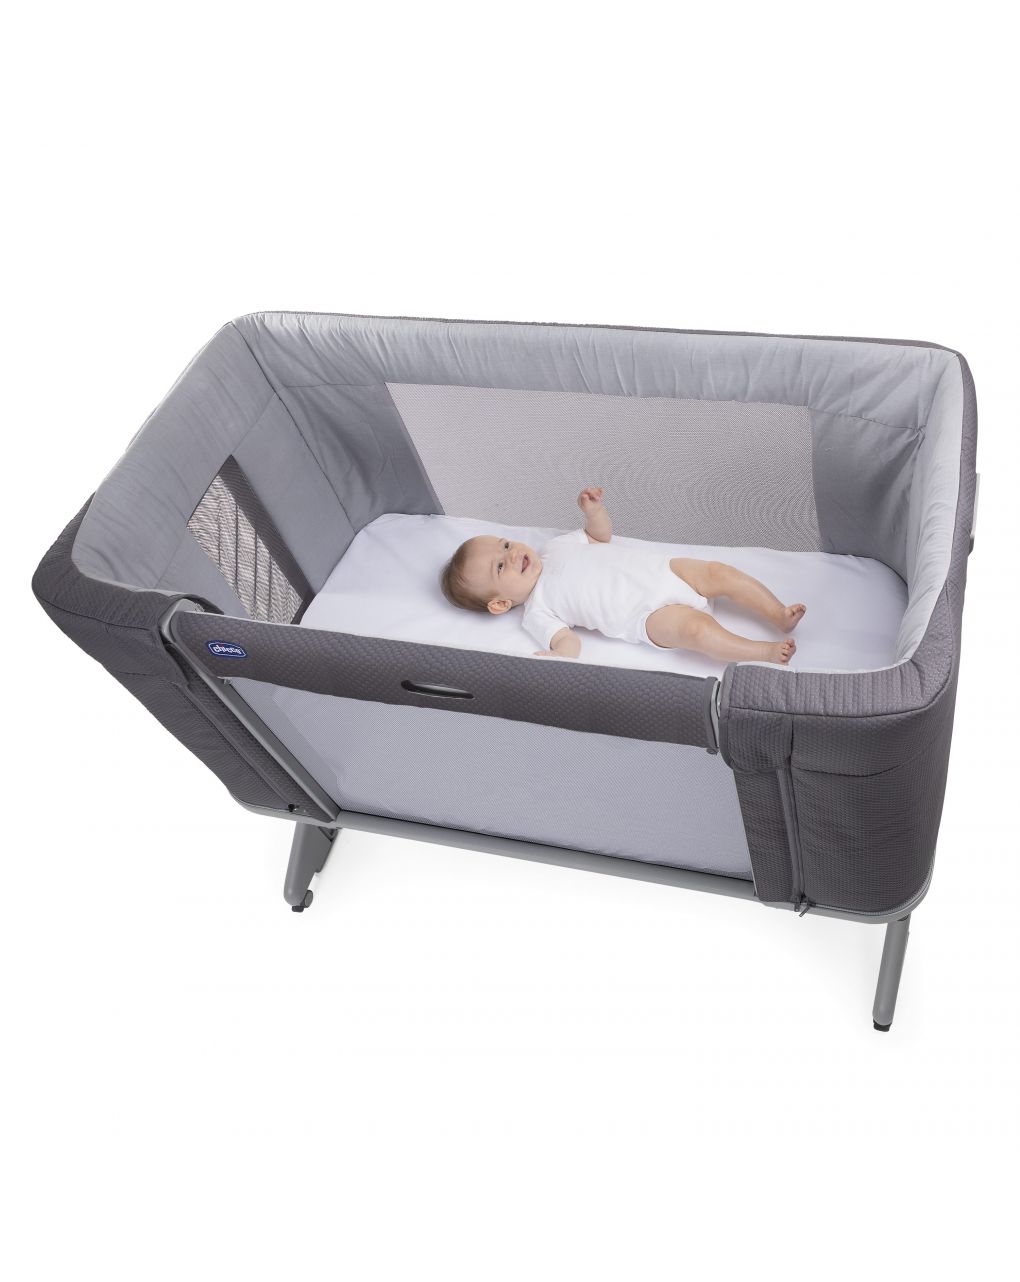 Next2me forever chicco moon grey - Chicco